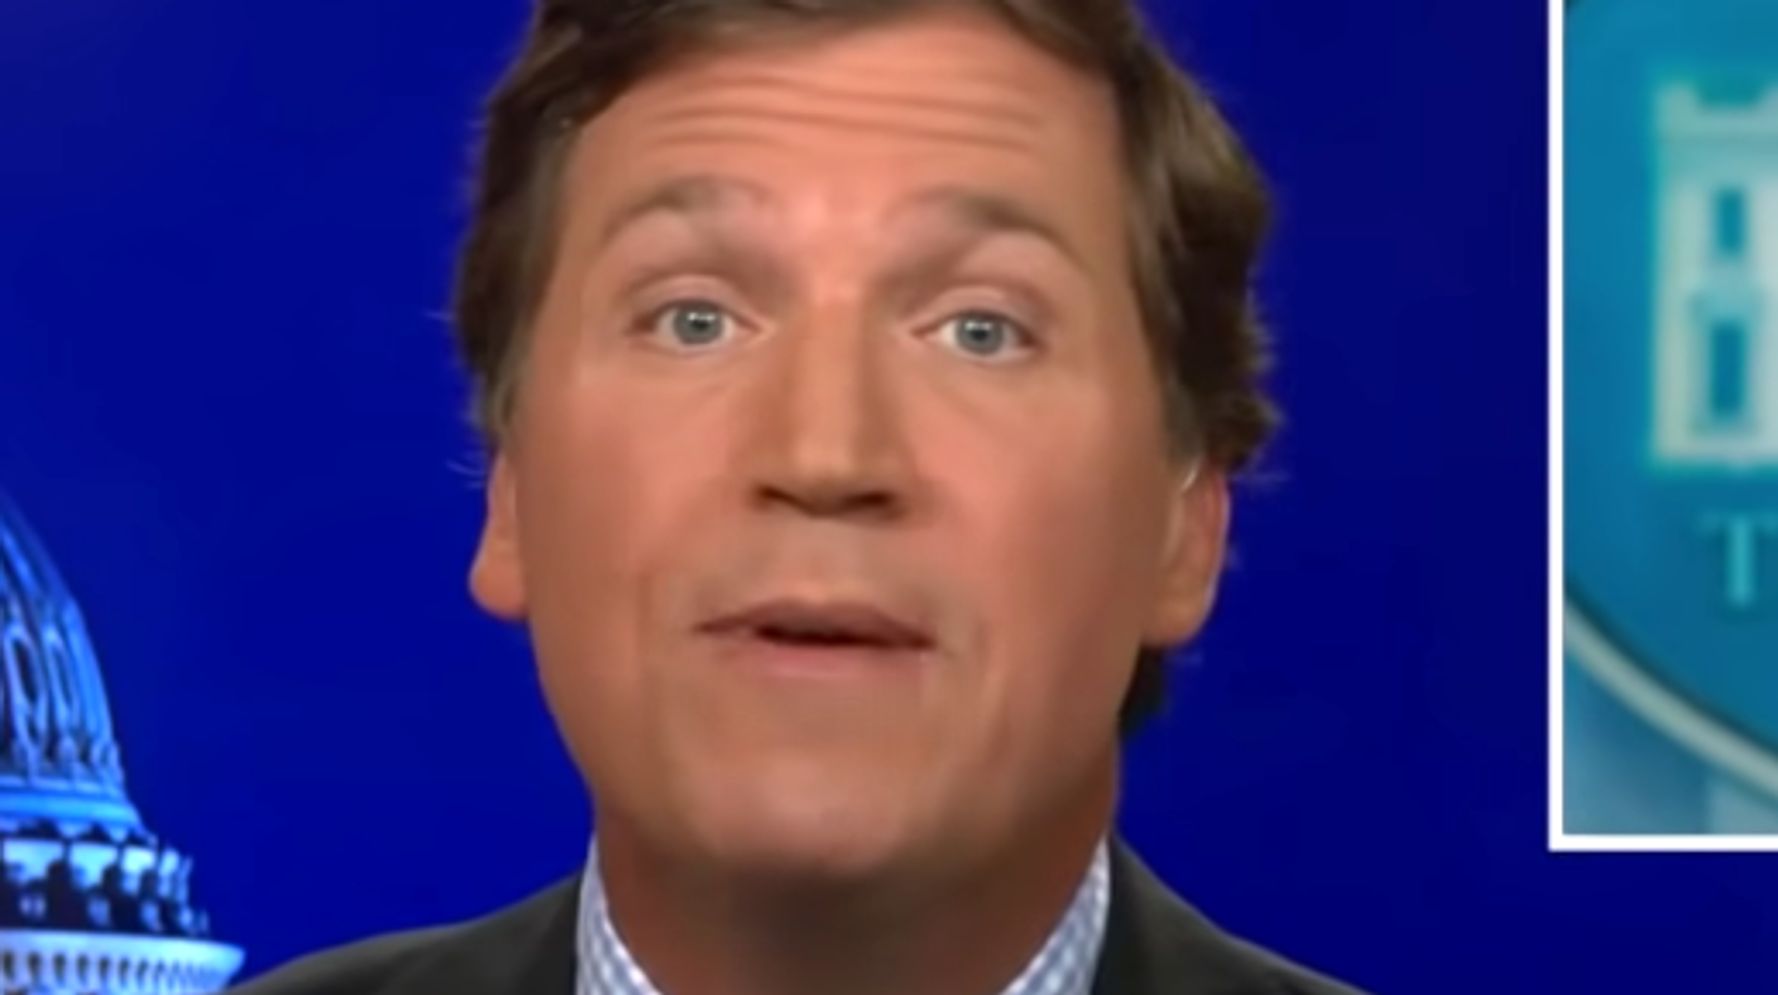 37-Second Montage Is All It Takes To Expose Tucker Carlson’s Hypocrisy